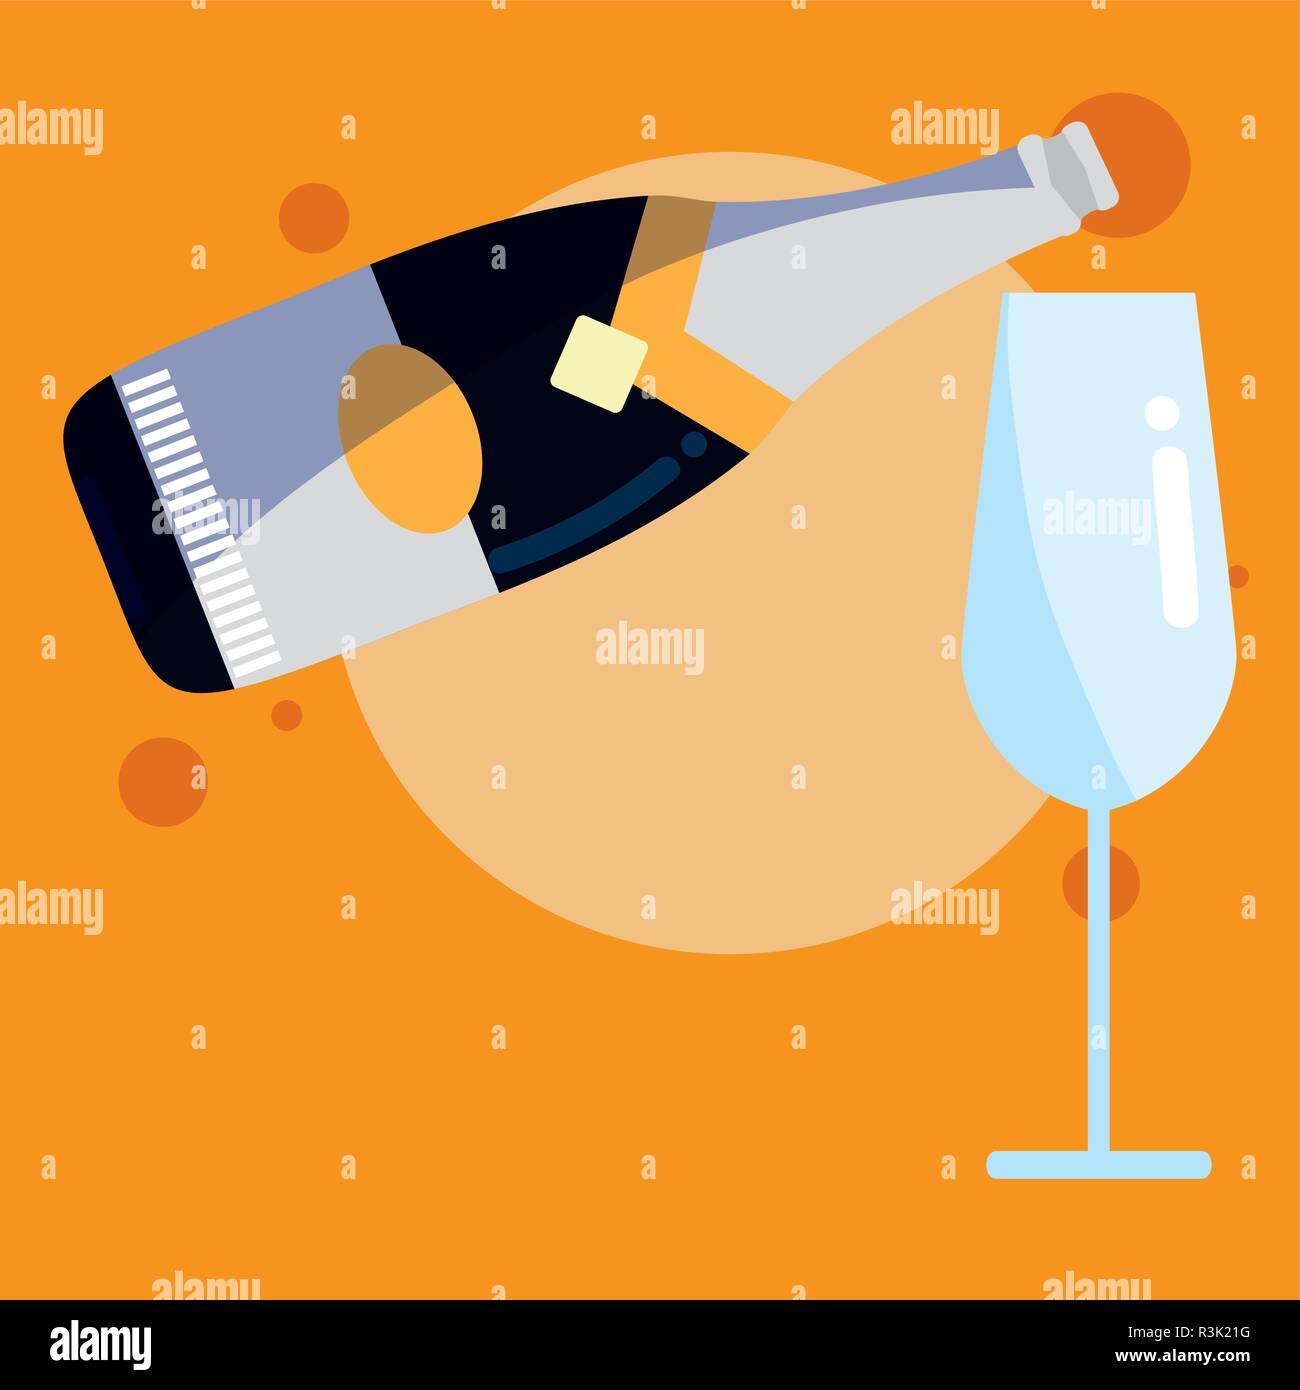 Champagne bottle and glass icon over orange  background, vector illustration Stock Vector